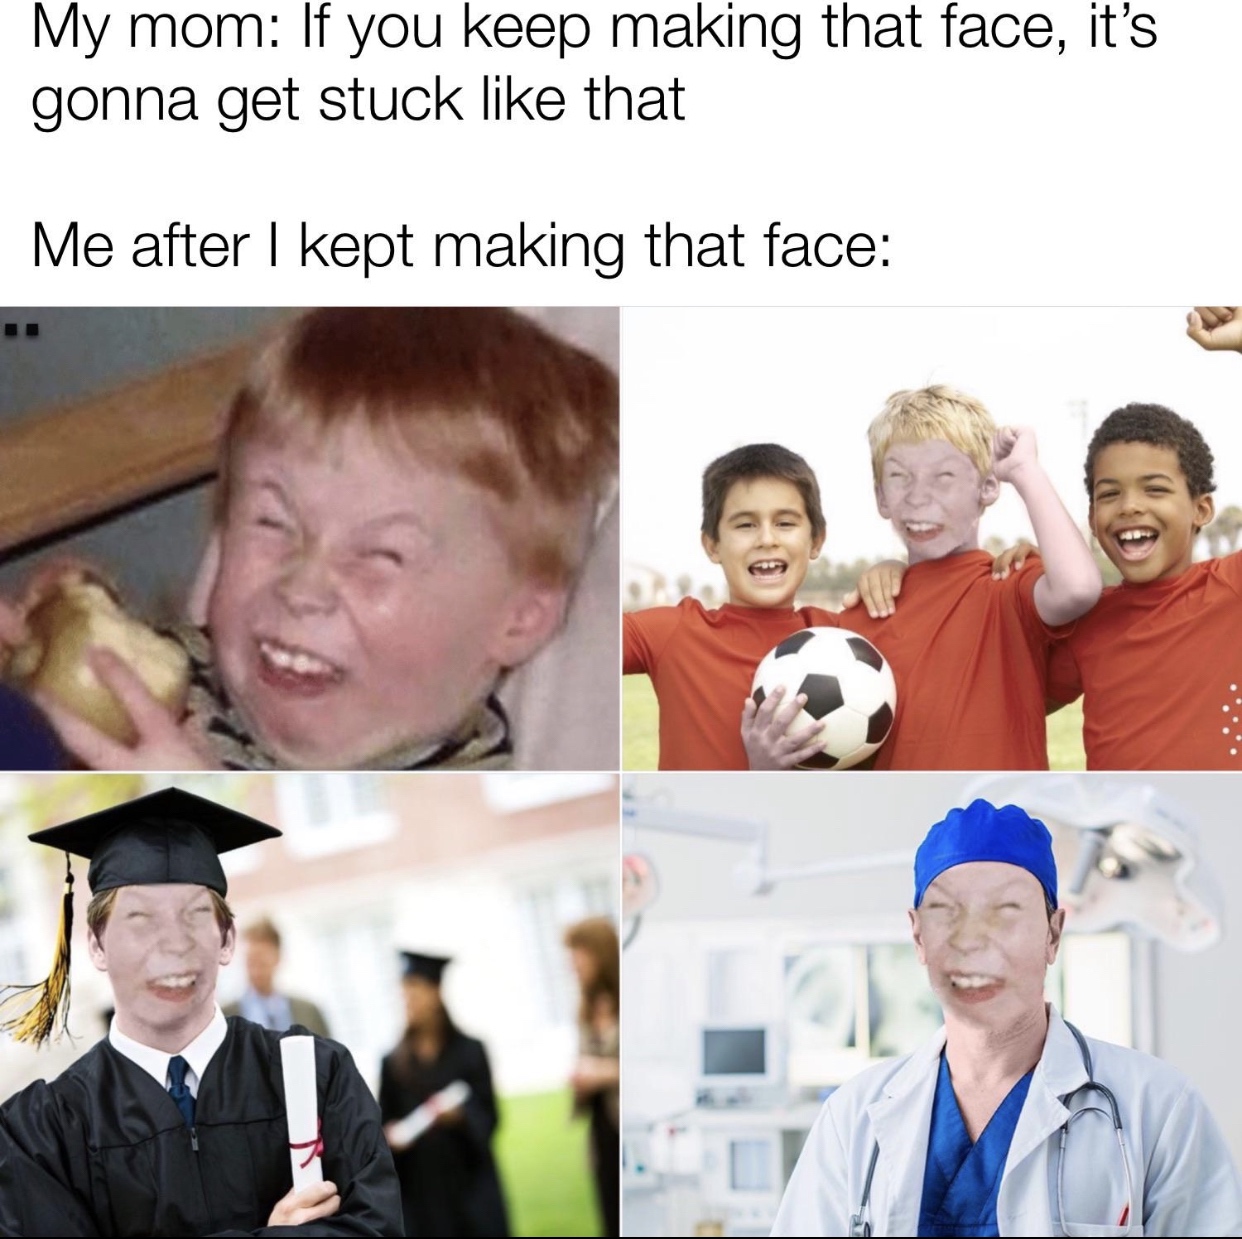 funny memes and tweets - education - My mom If you keep making that face, it's gonna get stuck that Me after I kept making that face